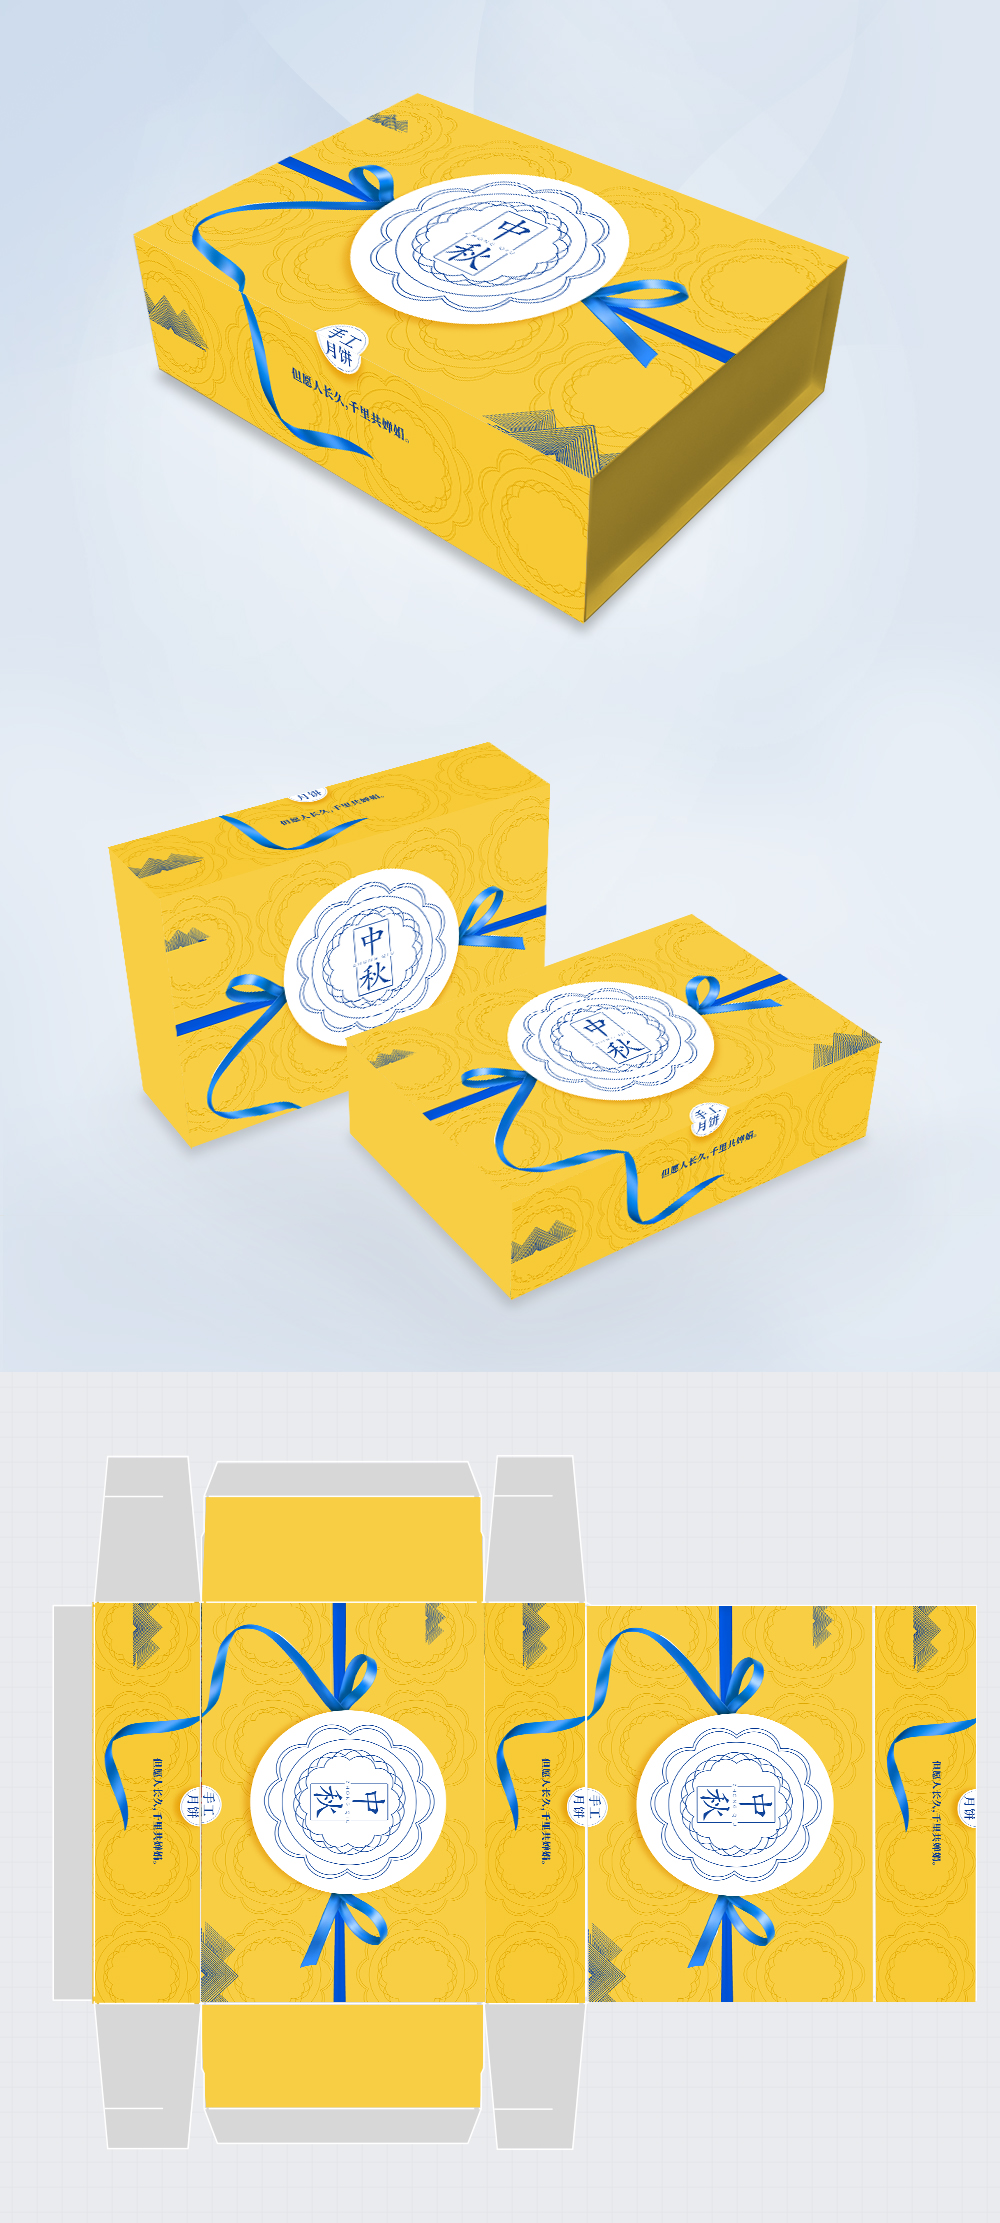 Download Yellow Simple Moon Cake Gift Box Packaging Template Image Picture Free Download 401575198 Lovepik Com Yellowimages Mockups